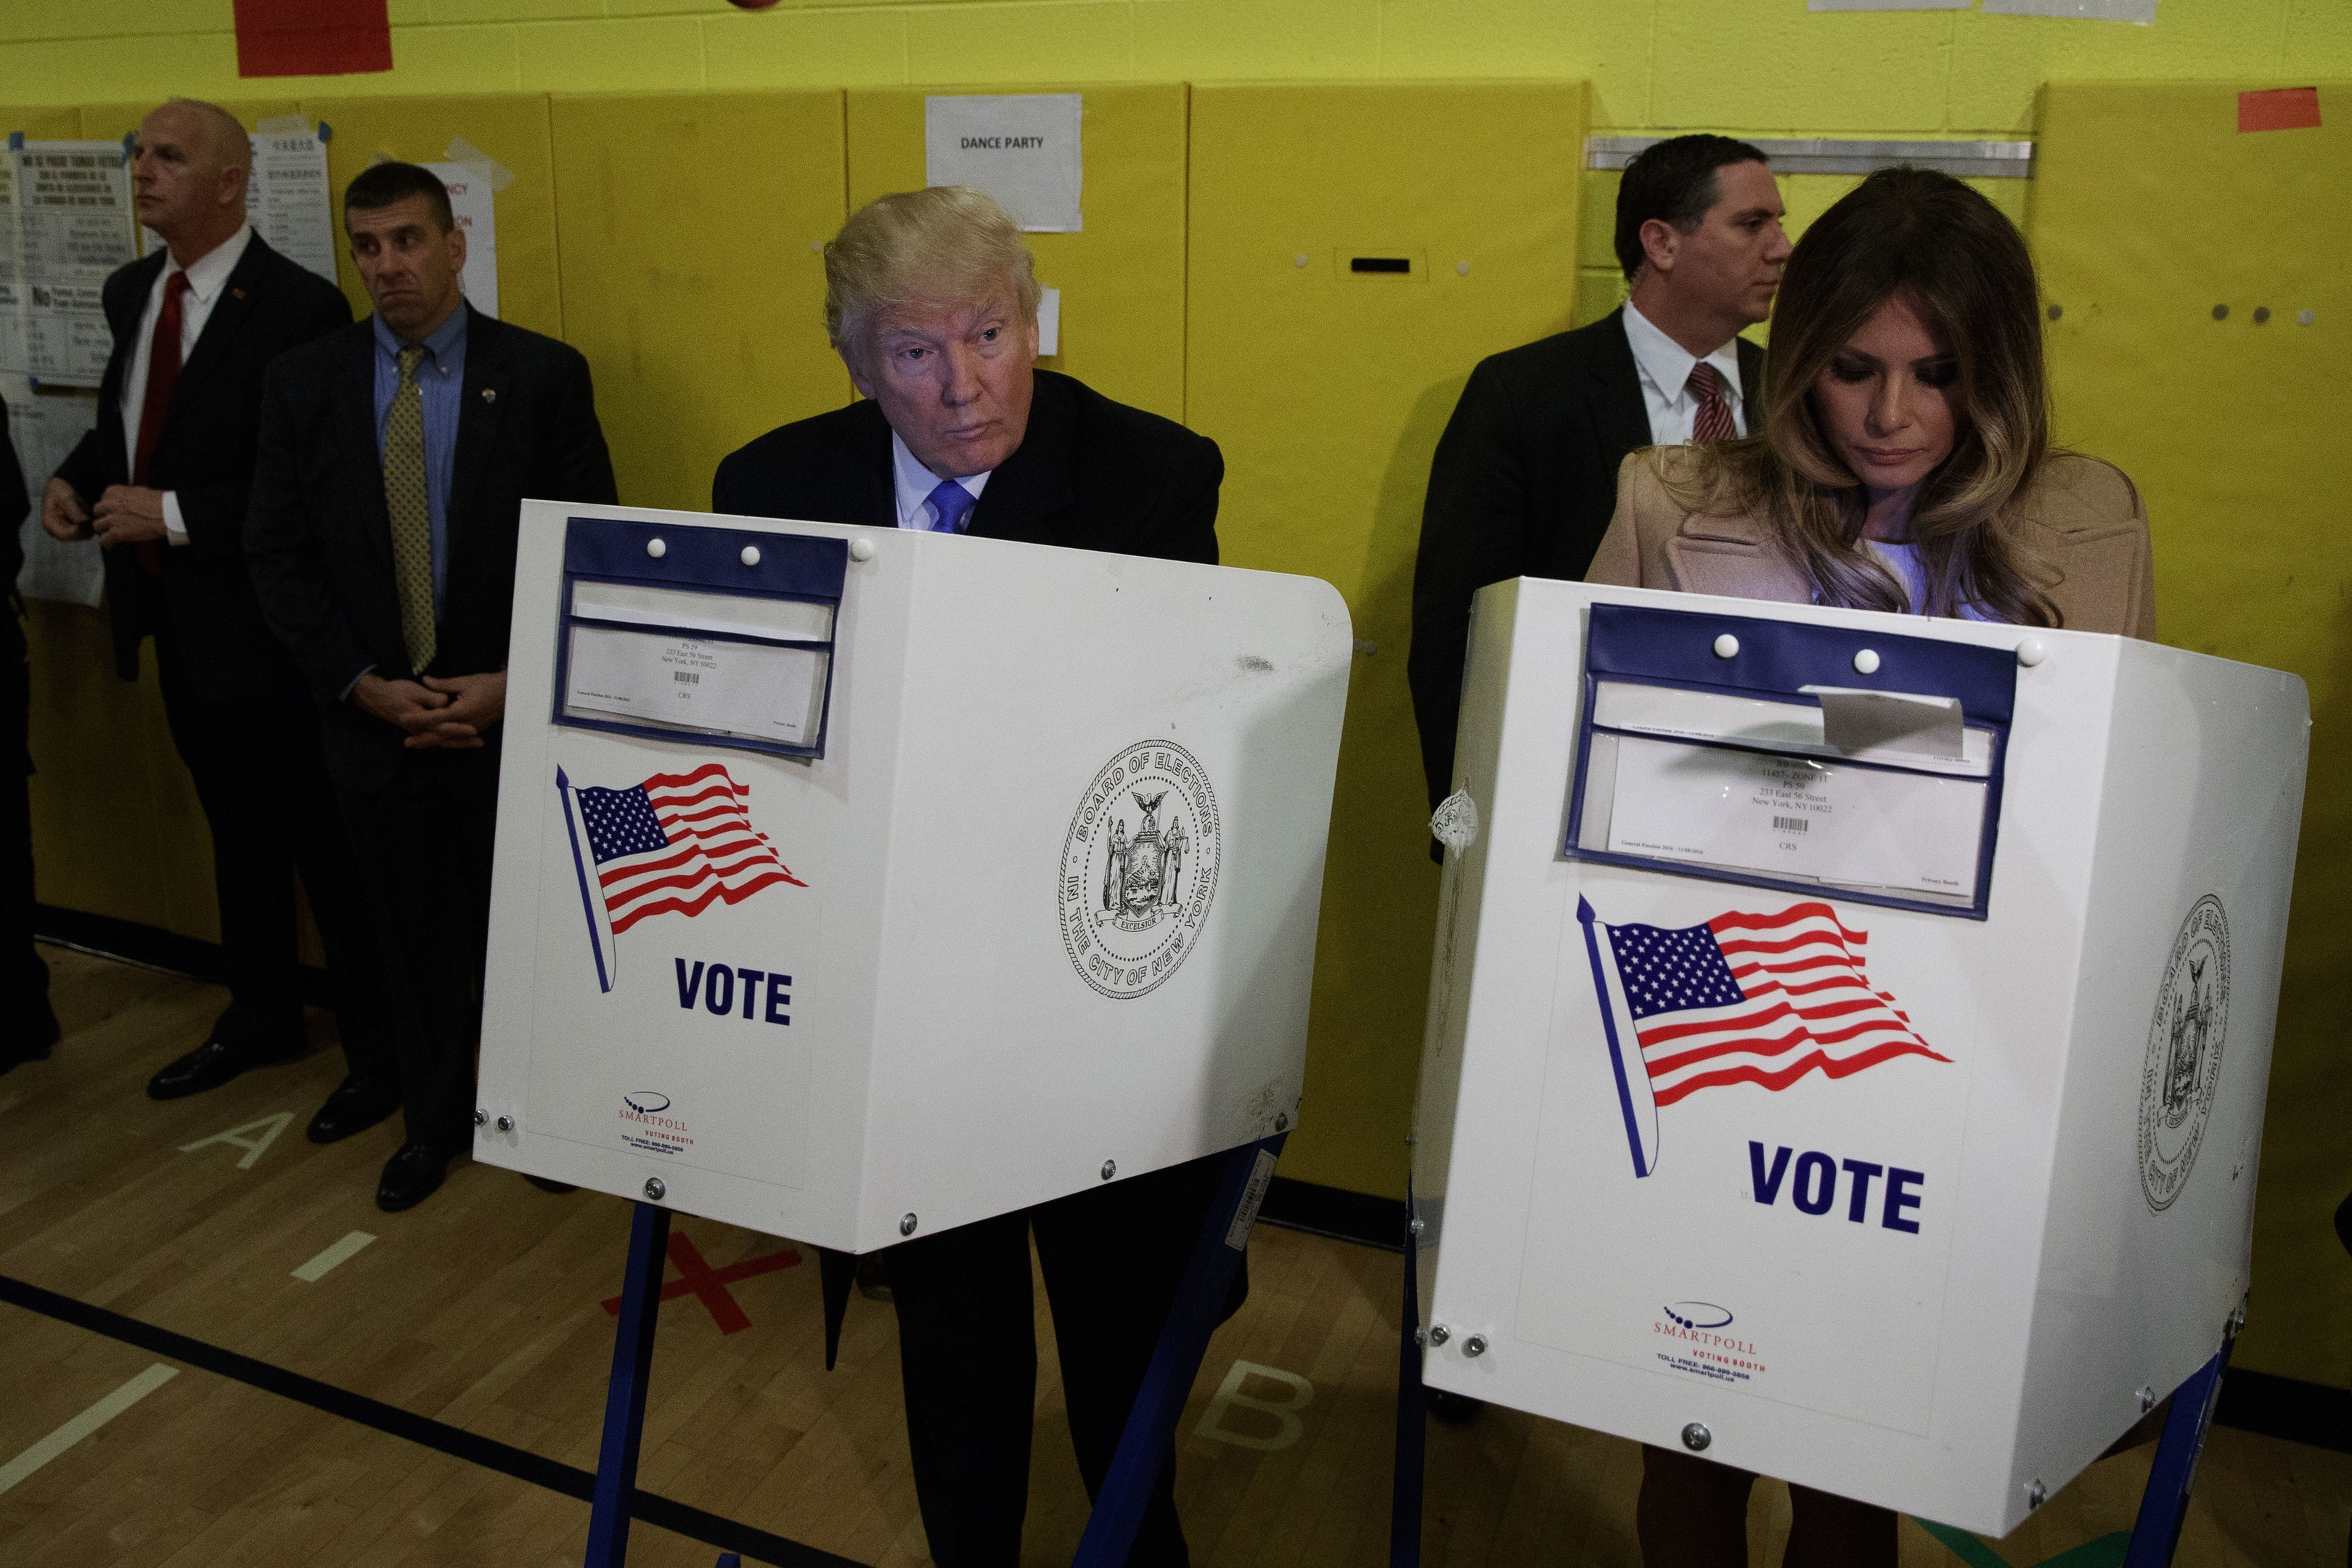 Republican presidential candidate Donald Trump, and his wife Melania, casts their ballots at PS-59, Tuesday, Nov. 8, 2016, in New York. (AP Photo/ Evan Vucci)